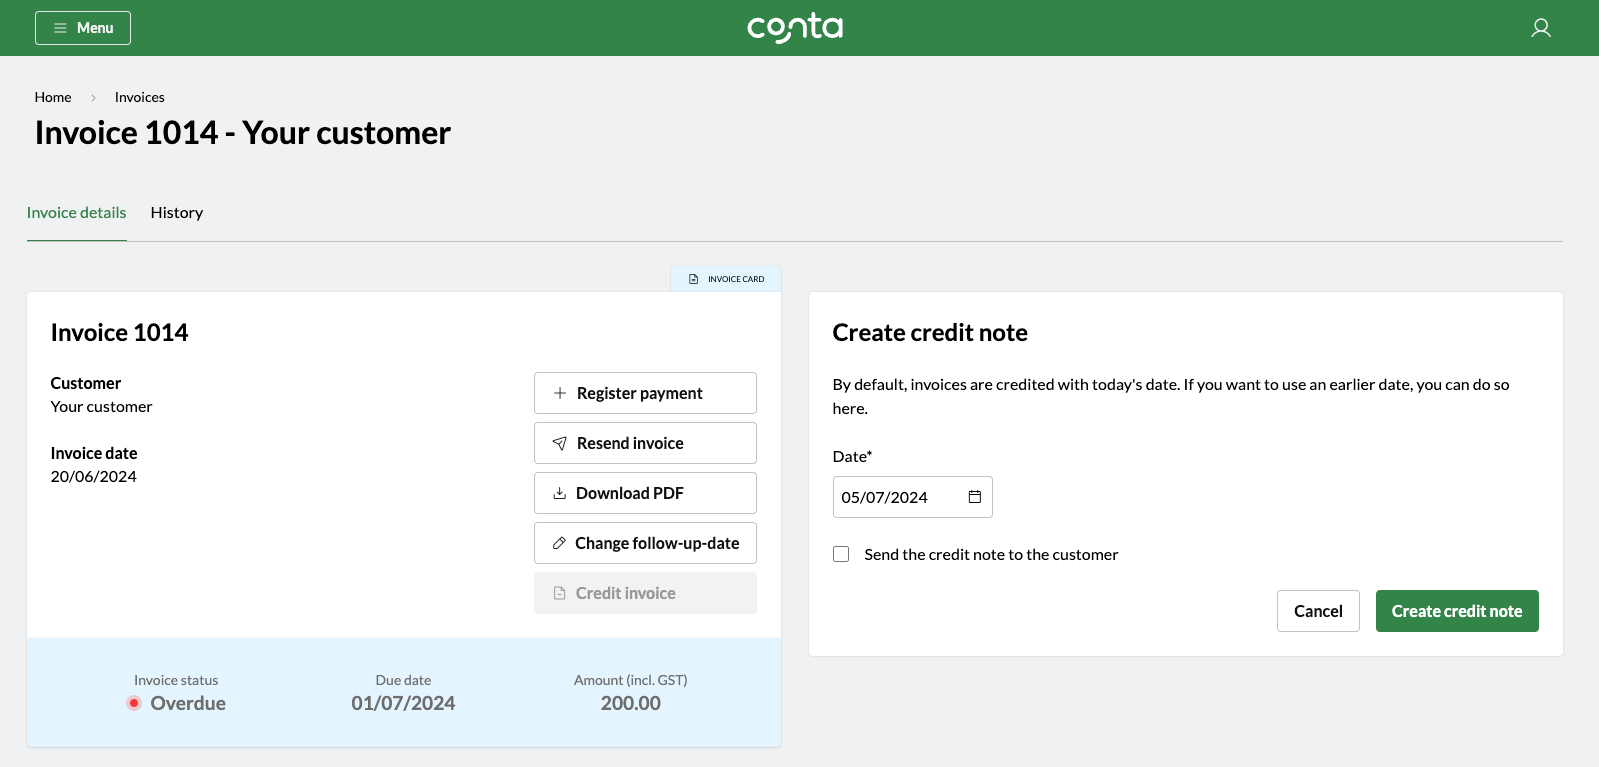 The invoice view in Conta, where you can create a credit note.